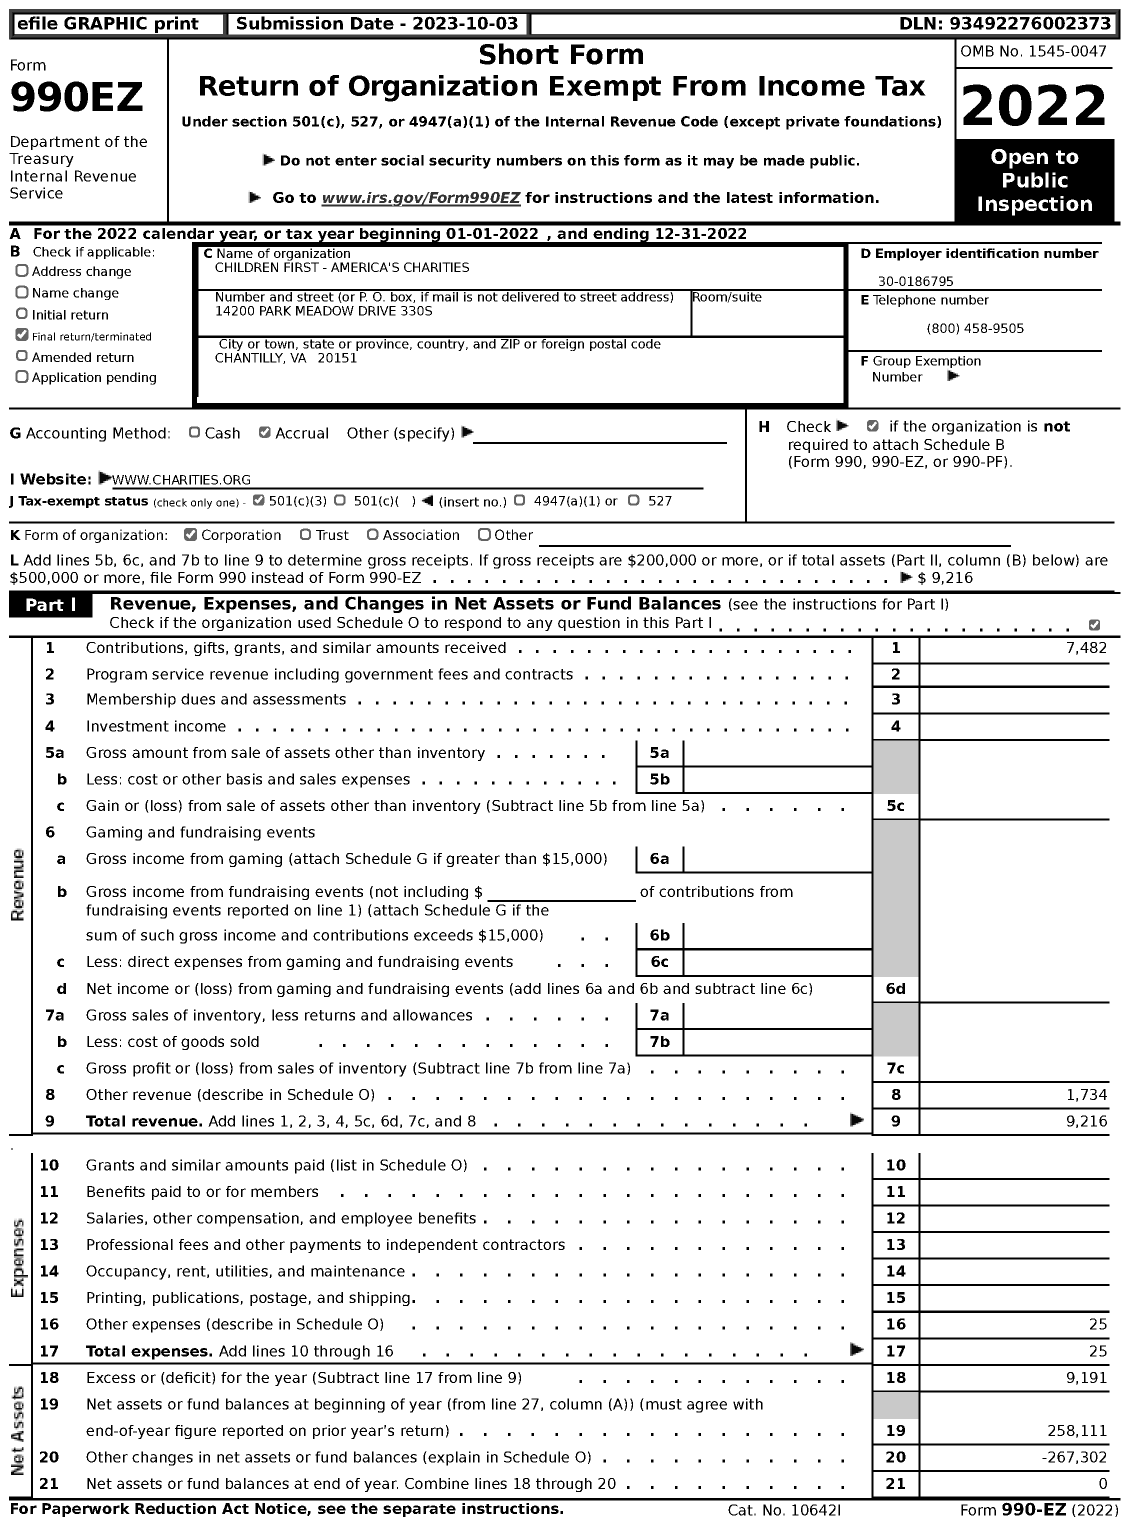 Image of first page of 2022 Form 990EZ for Children First - America's Charities